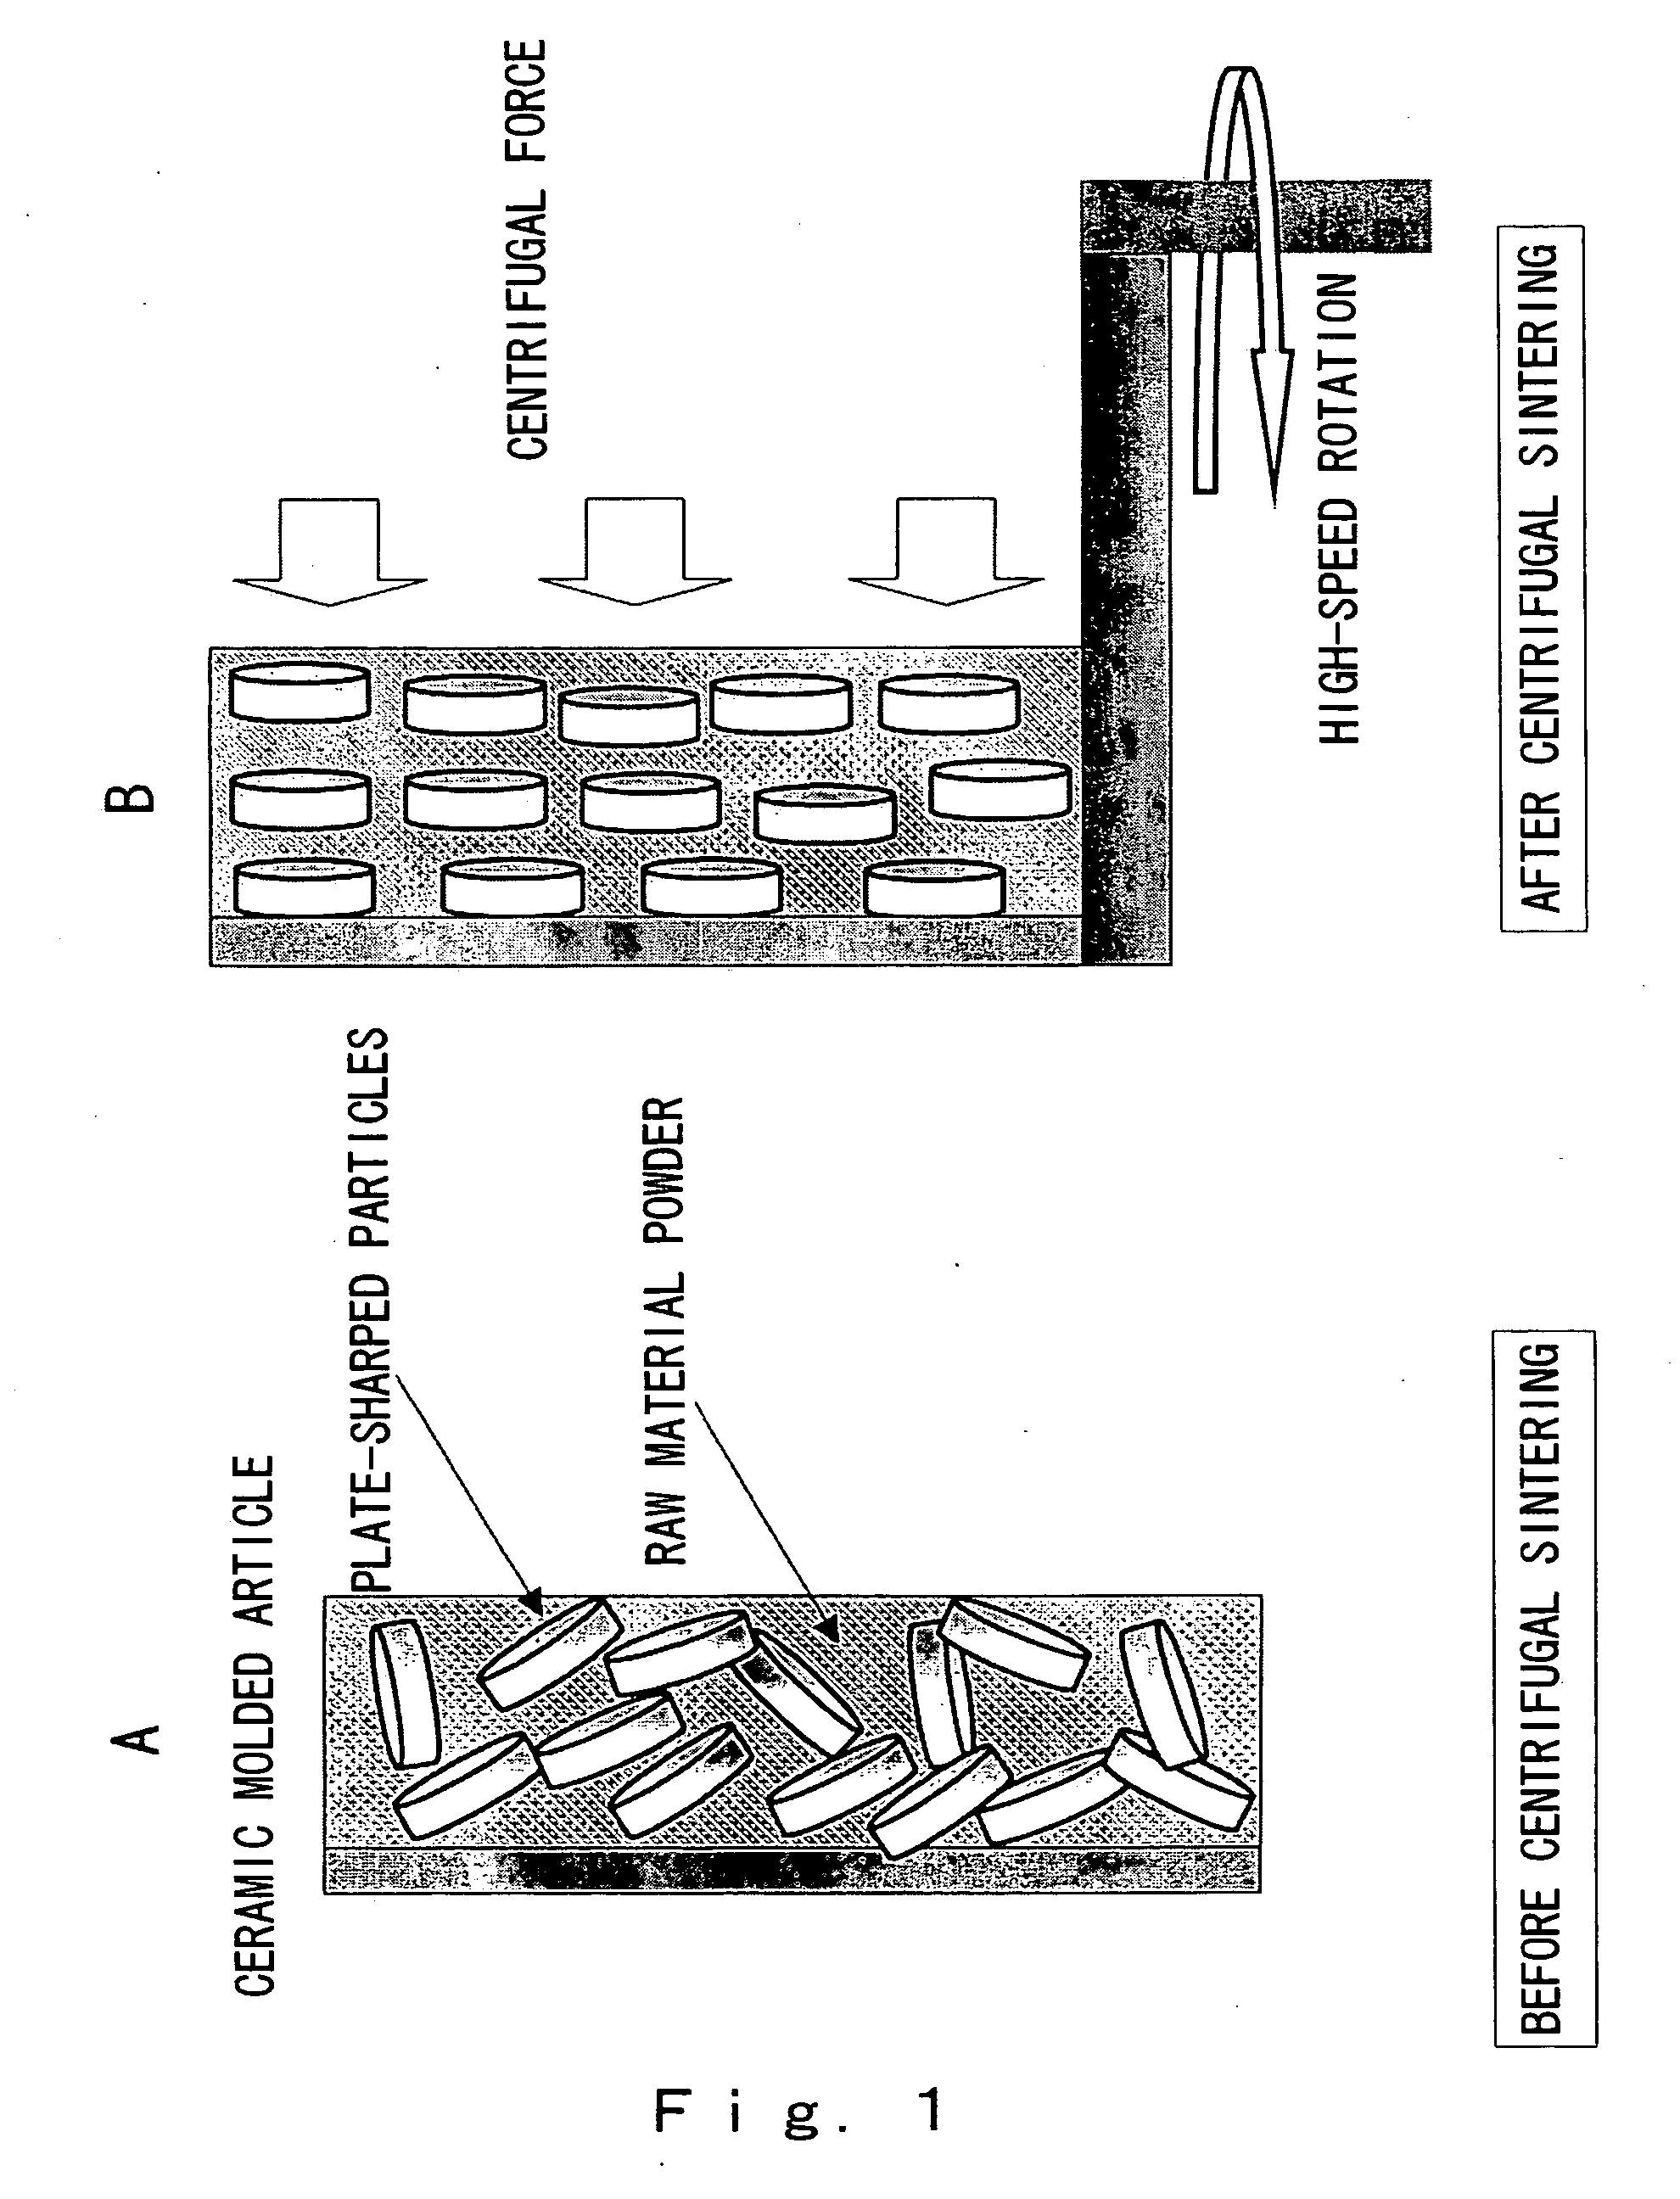 Production of oriented material or composite matrial through centrifugal burning